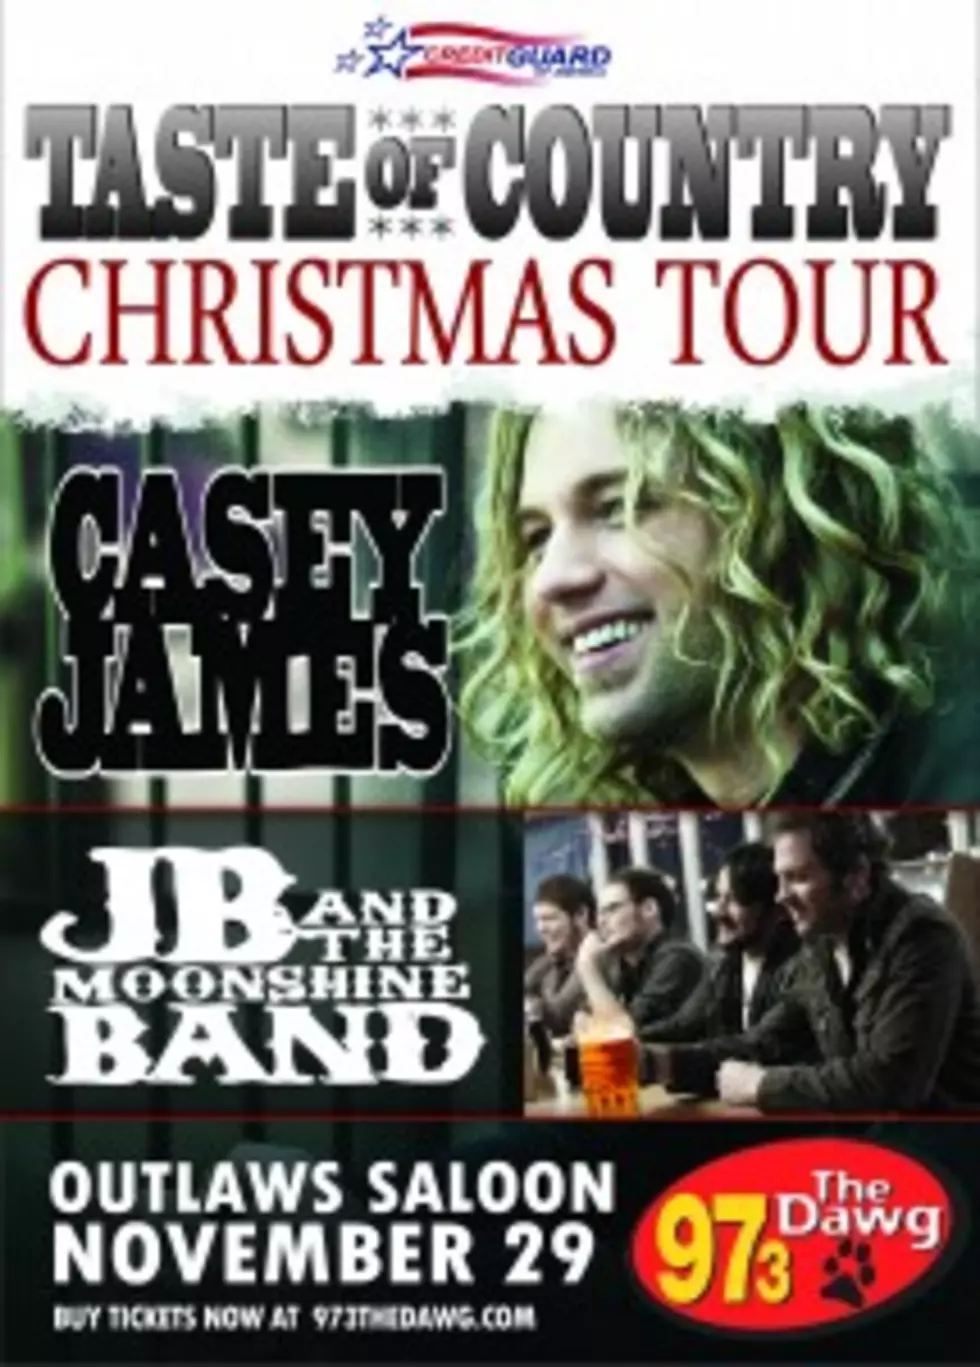 Taste of Country Christmas Tour Returns with Casey James!